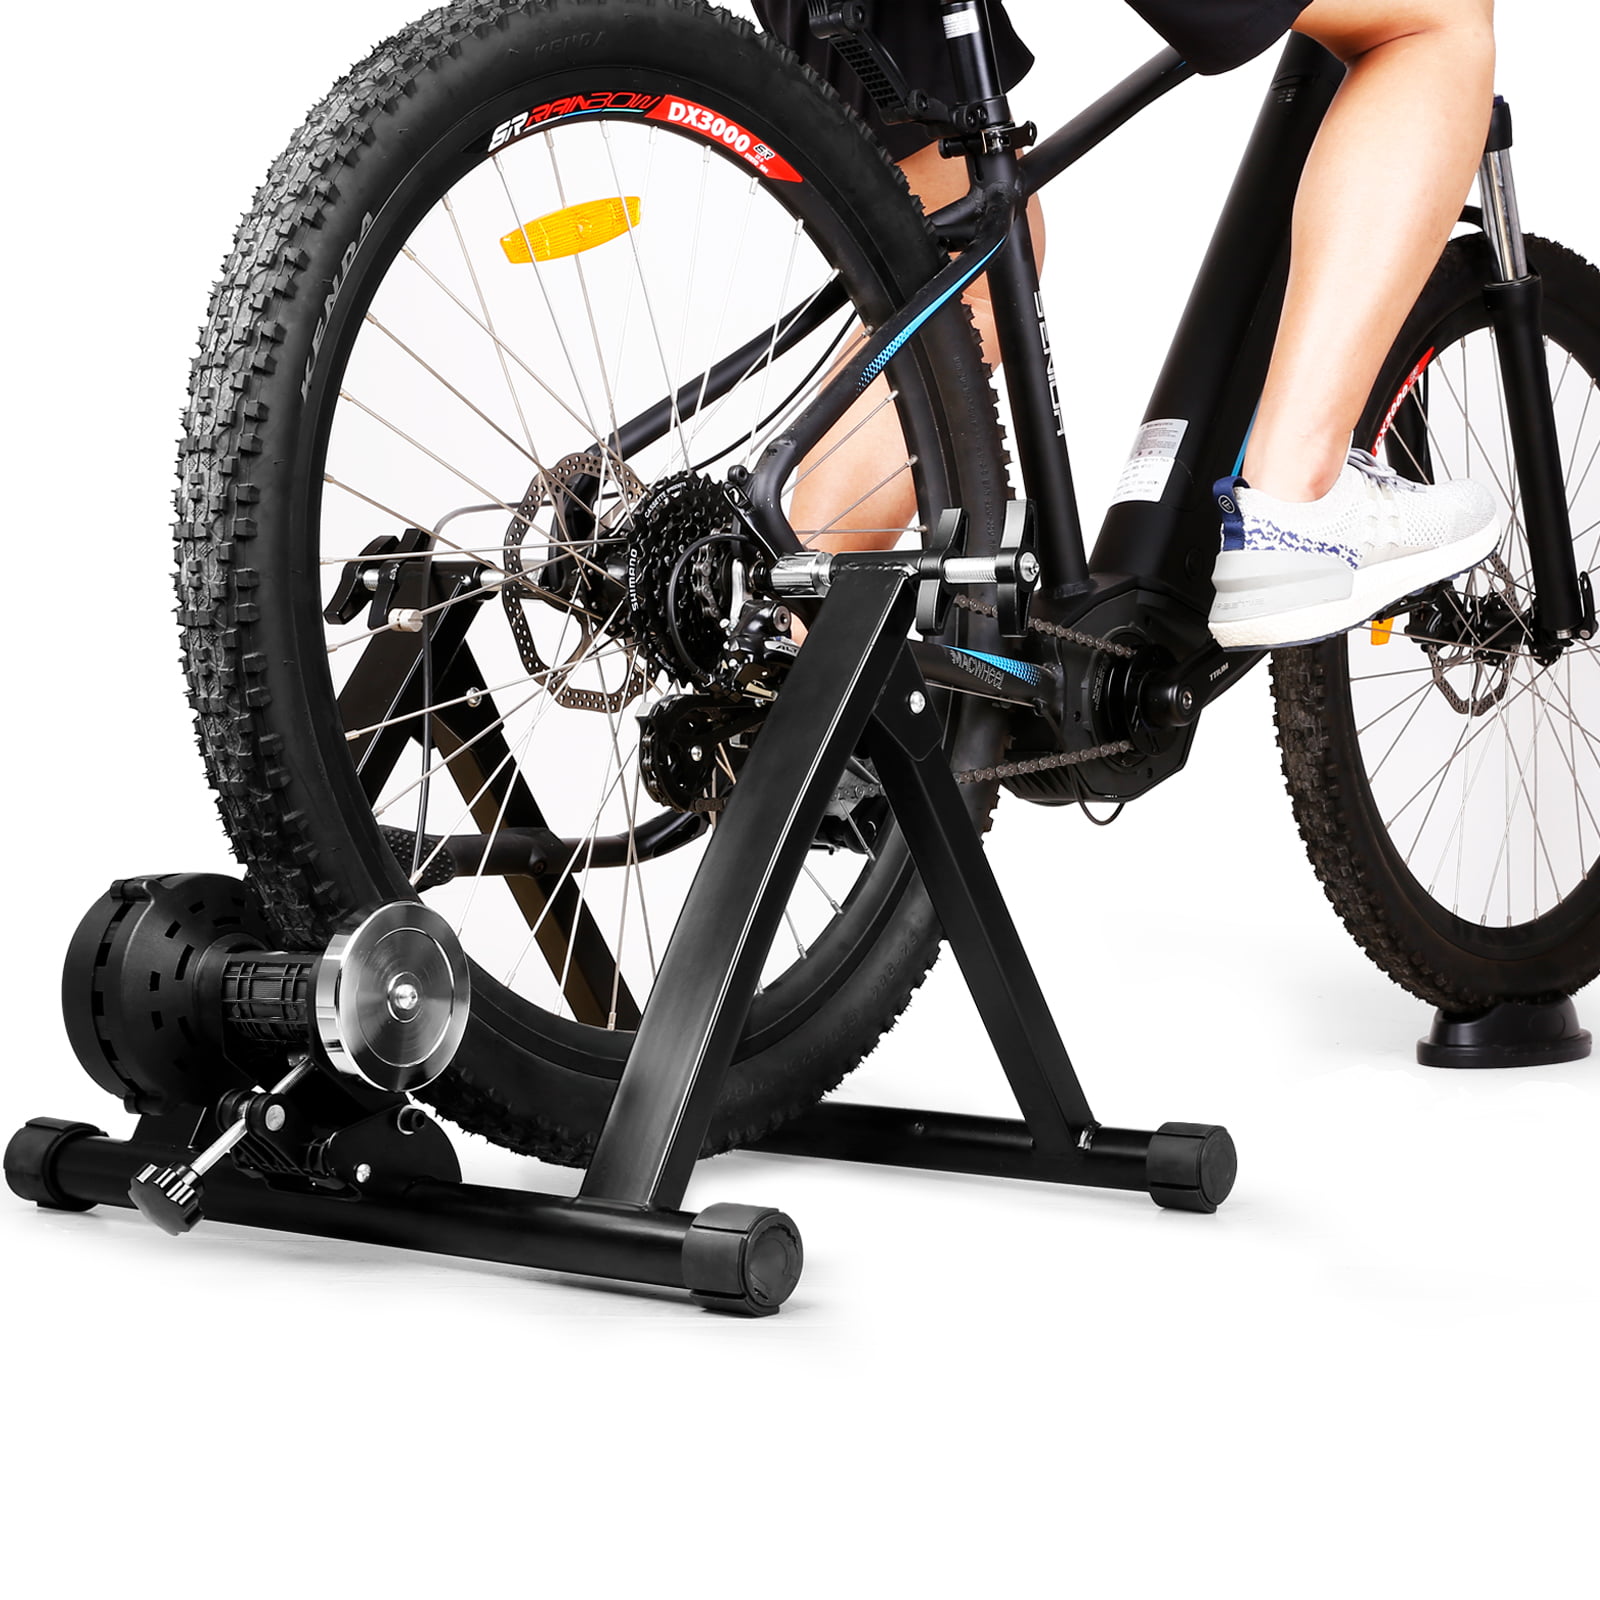 Exercise Bicycle Trainer Stand Stationary Indoor 7 Level Magnetic Resistance New 